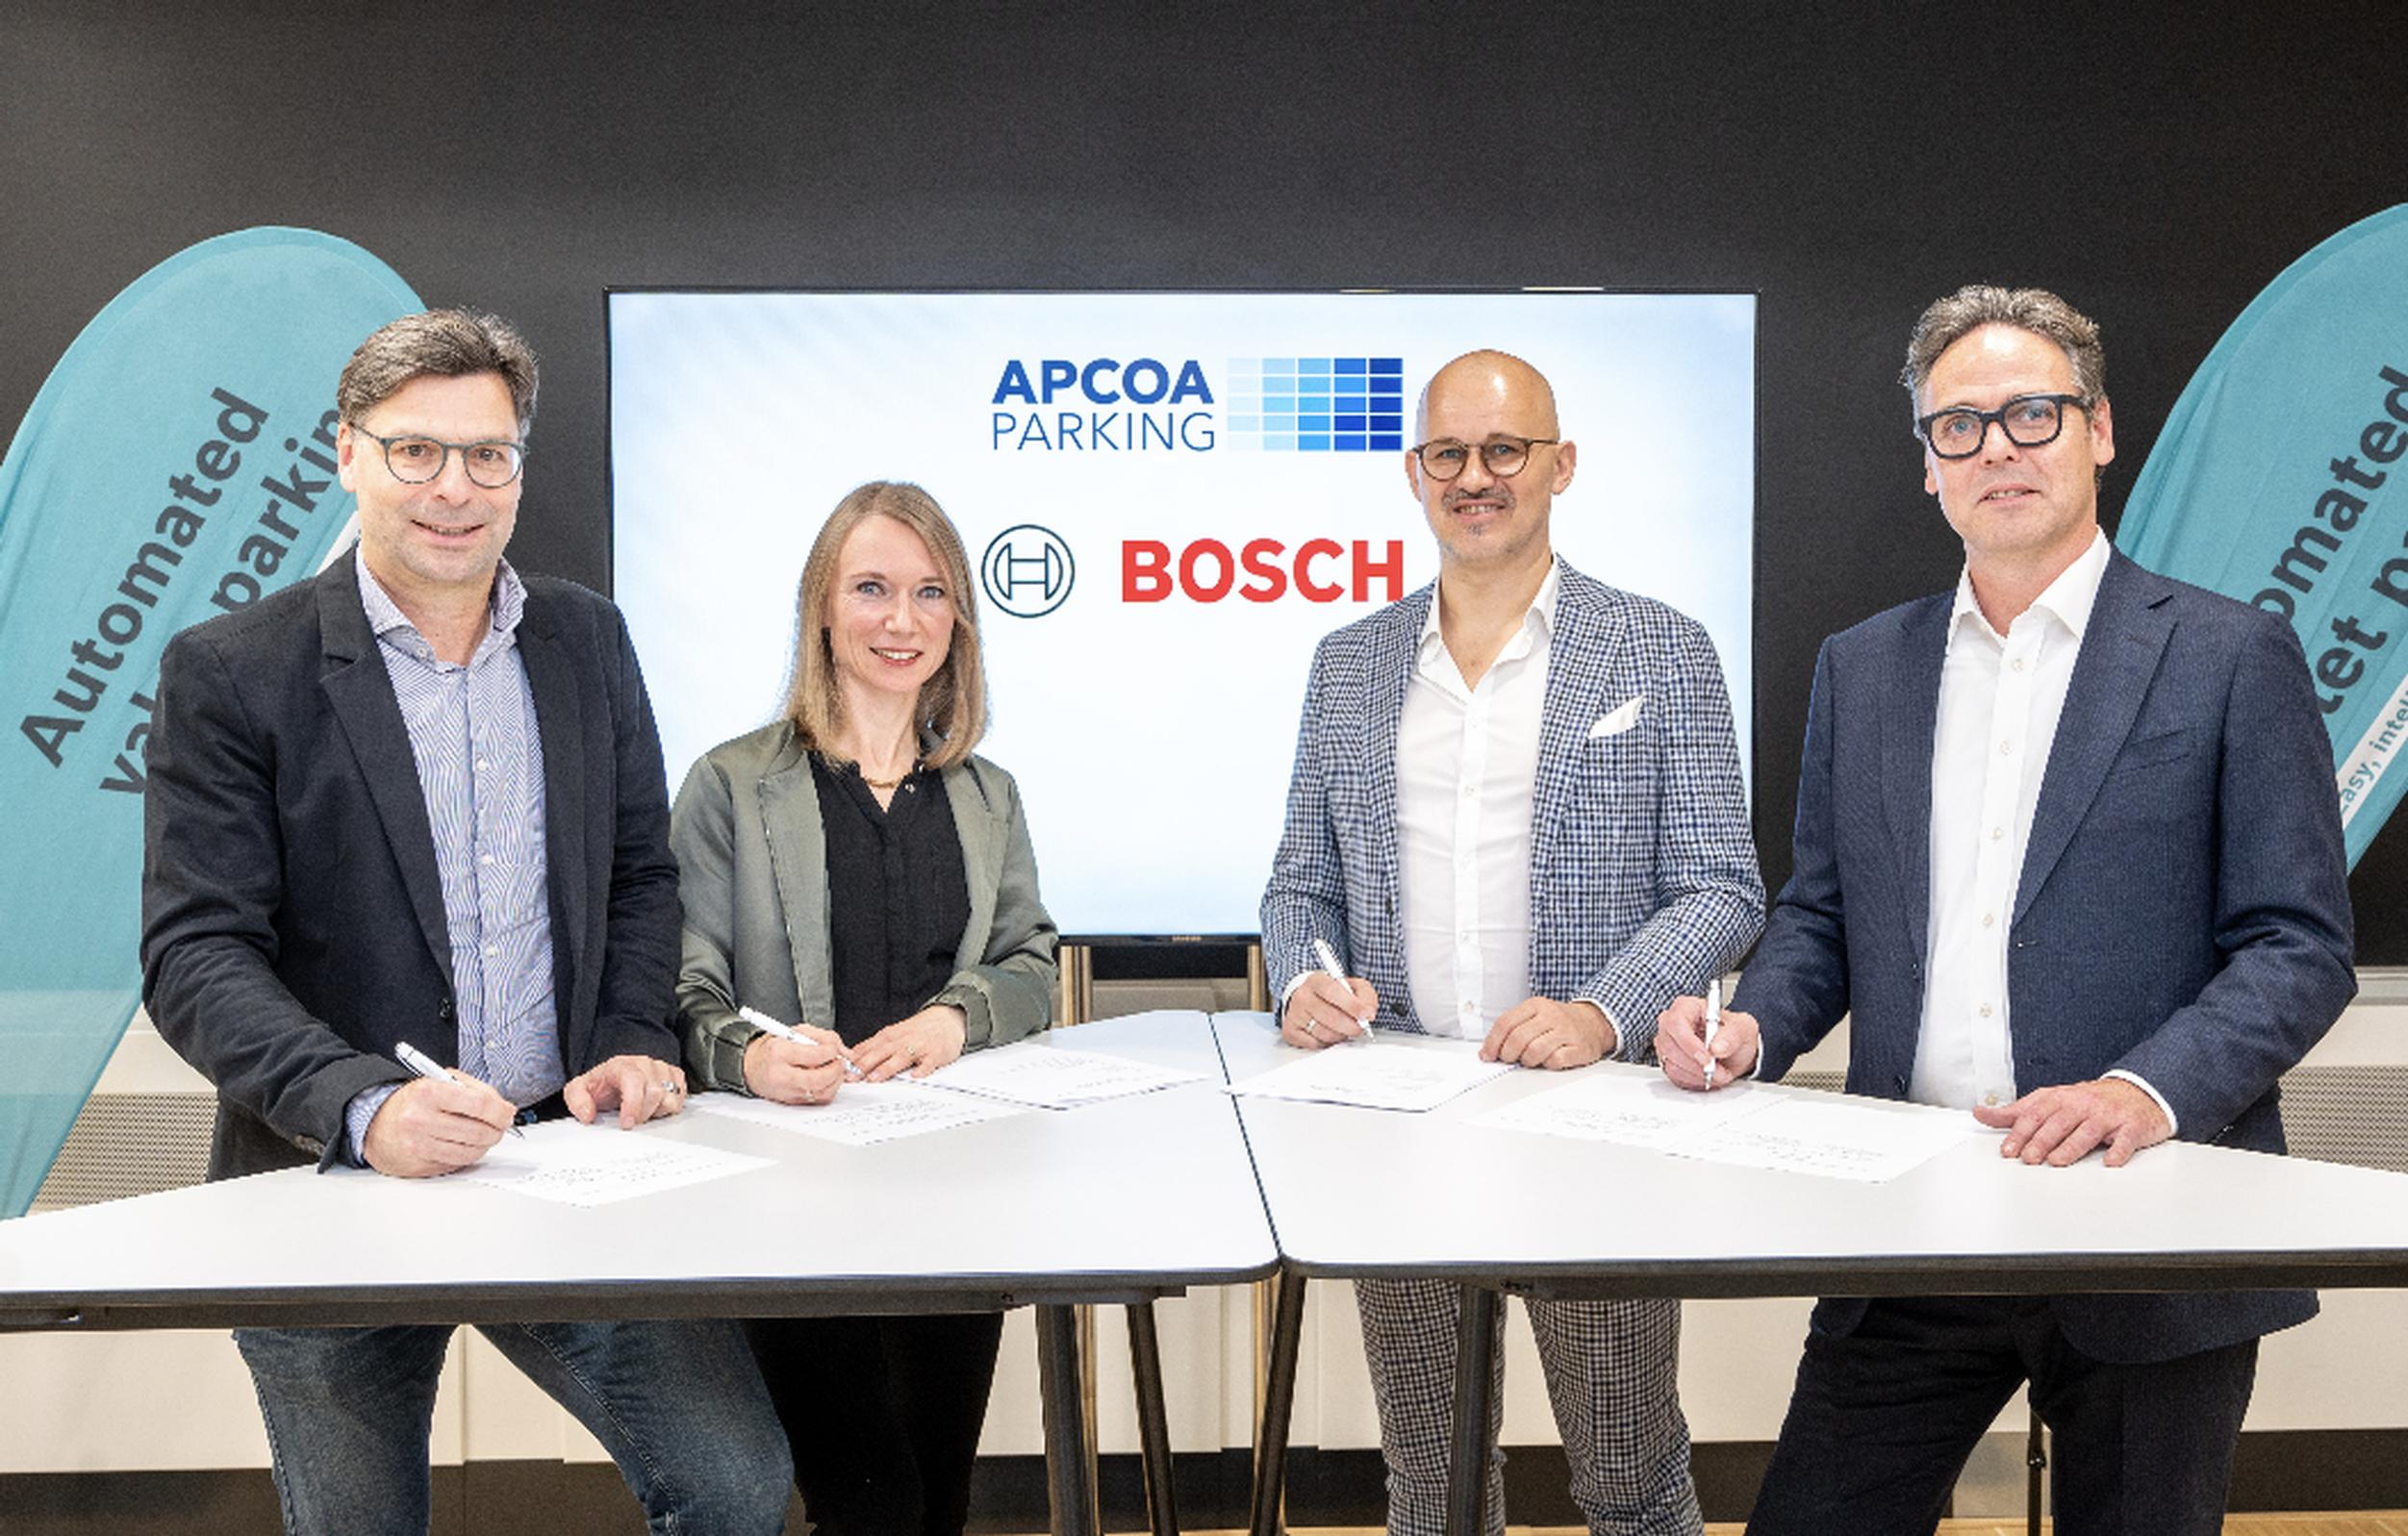 APCOA and Bosch are working together